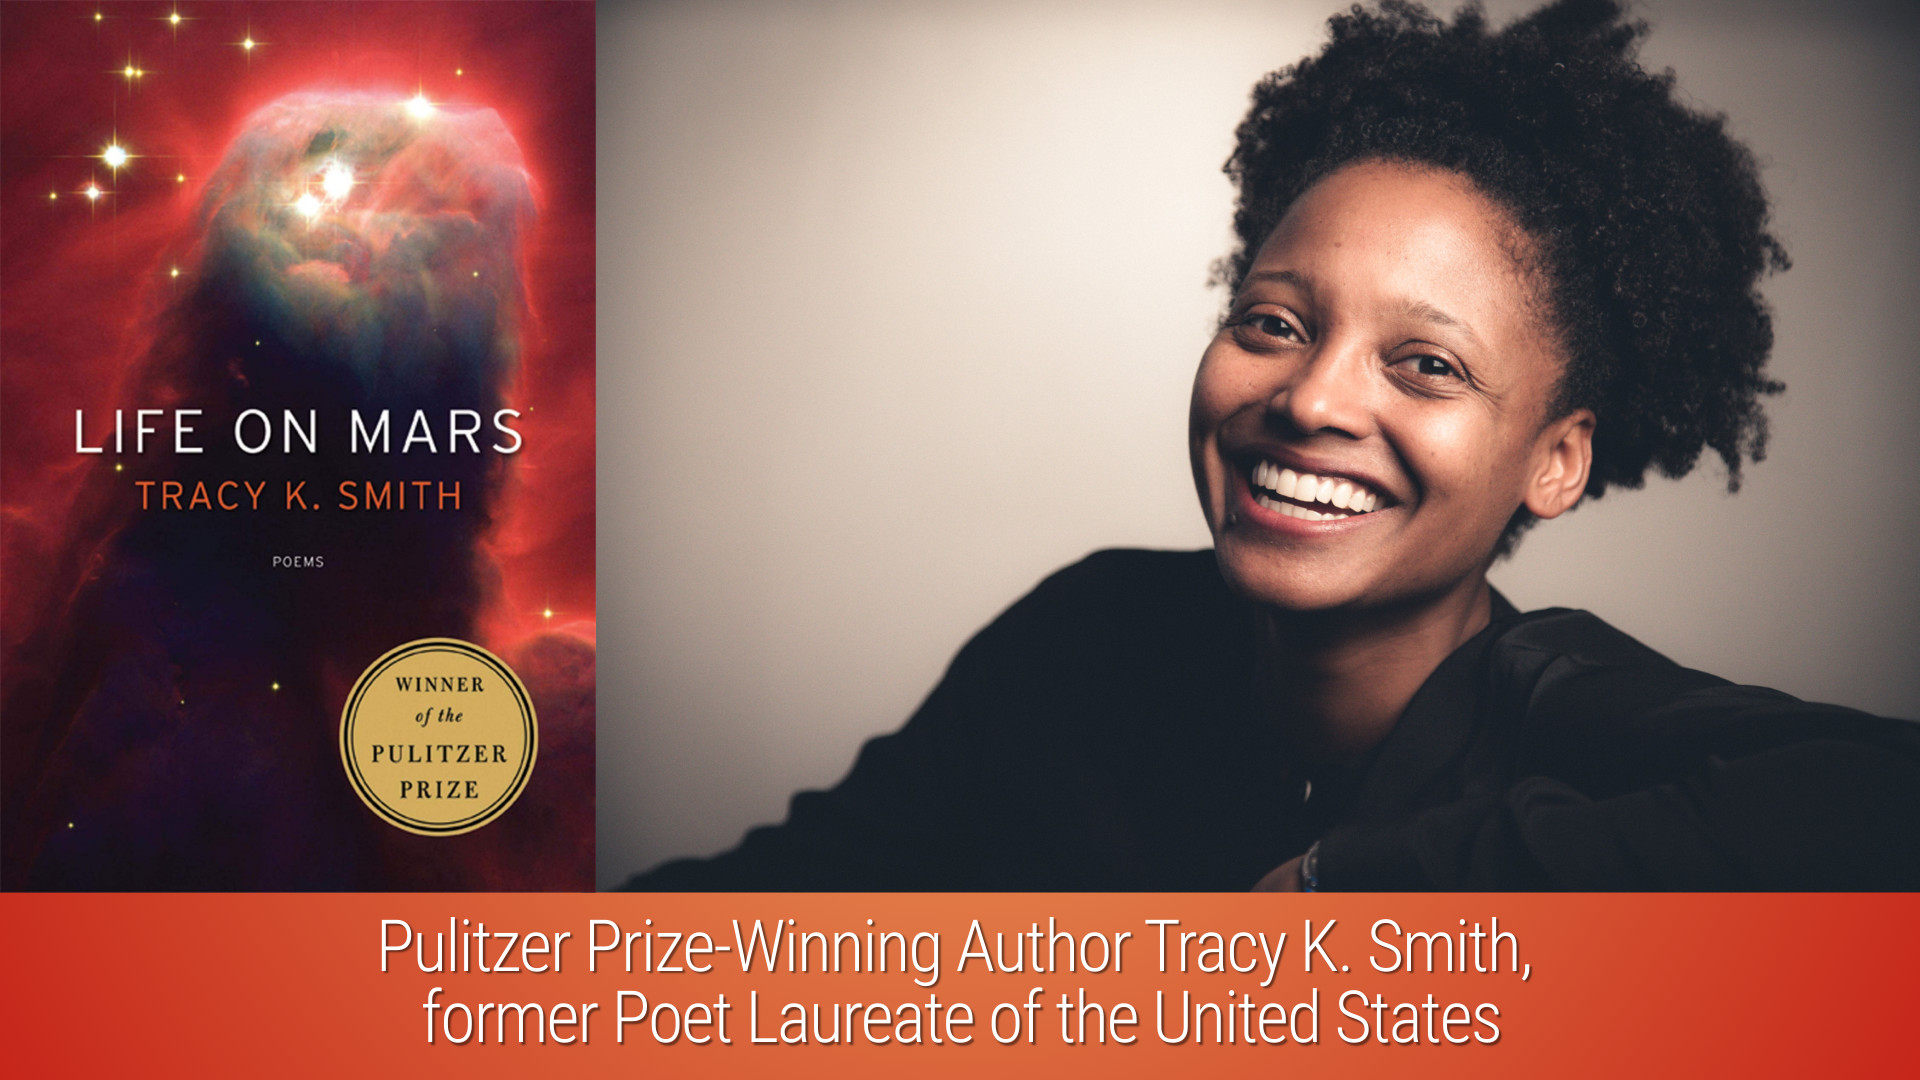 Pulitzer Prize-Winning Author Tracy K. Smith, former Poet Laureate of the United States